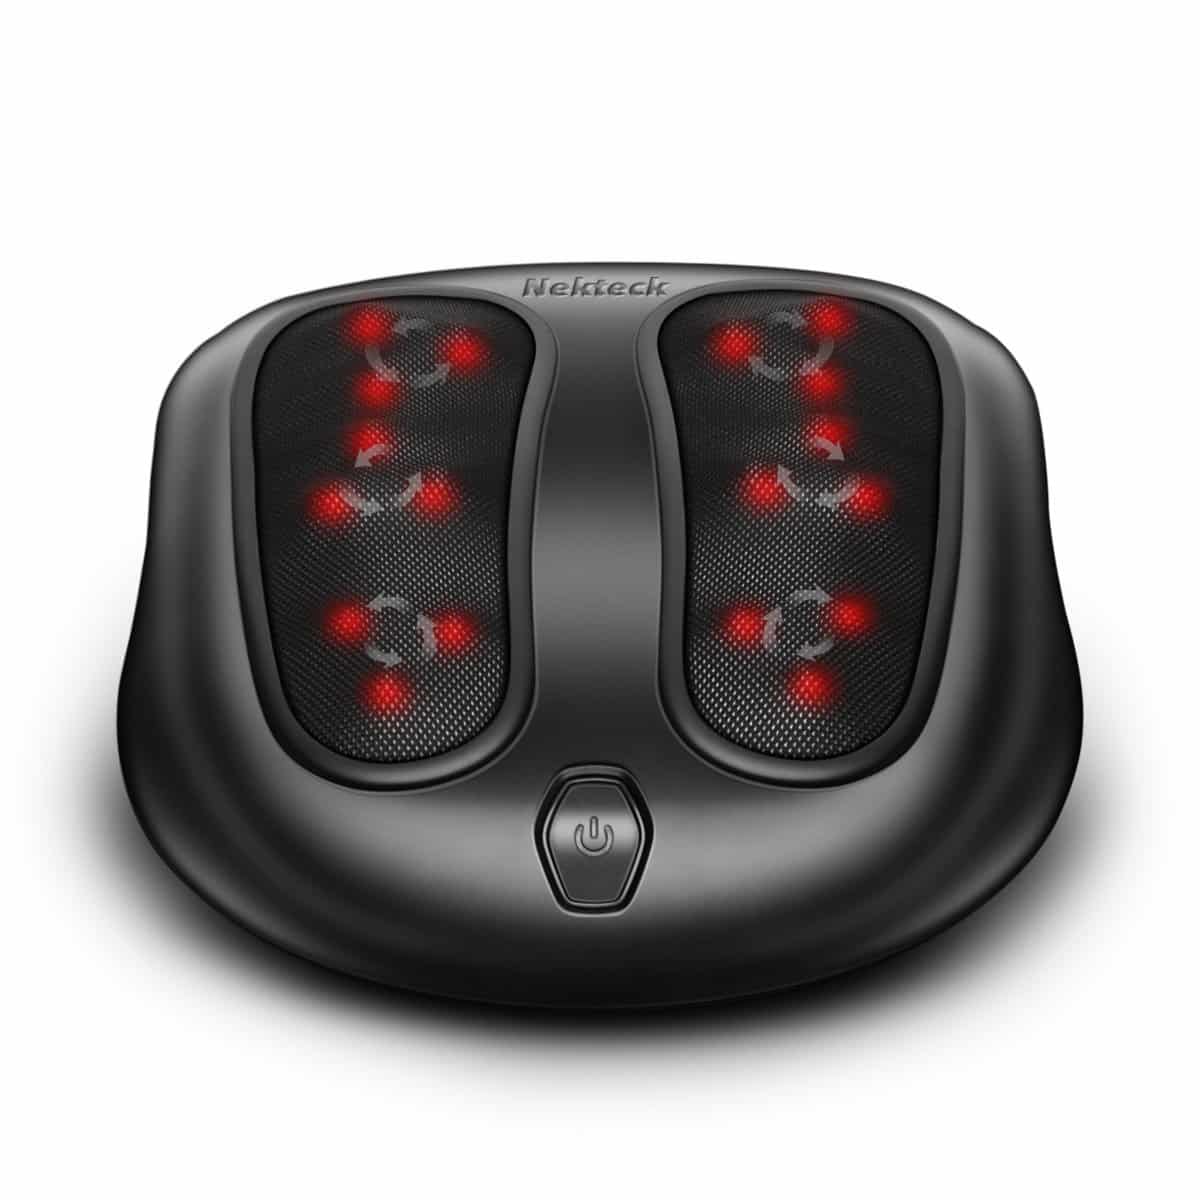 5 Best Foot Massagers in 2021 [Reviews & Guide]